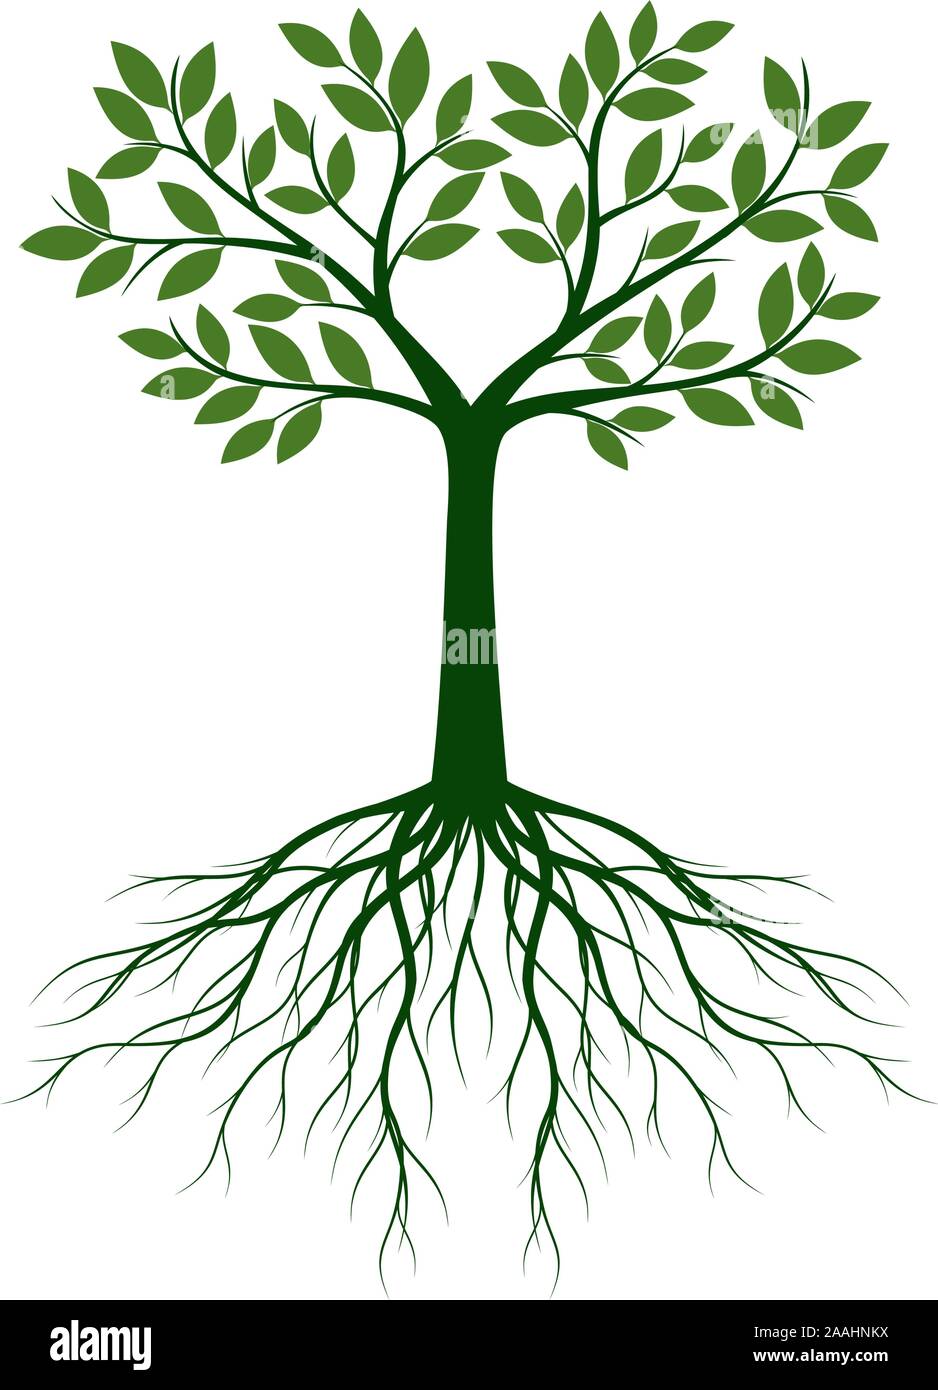 Green Tree With Leaves And Roots Vector Outline Illustration On